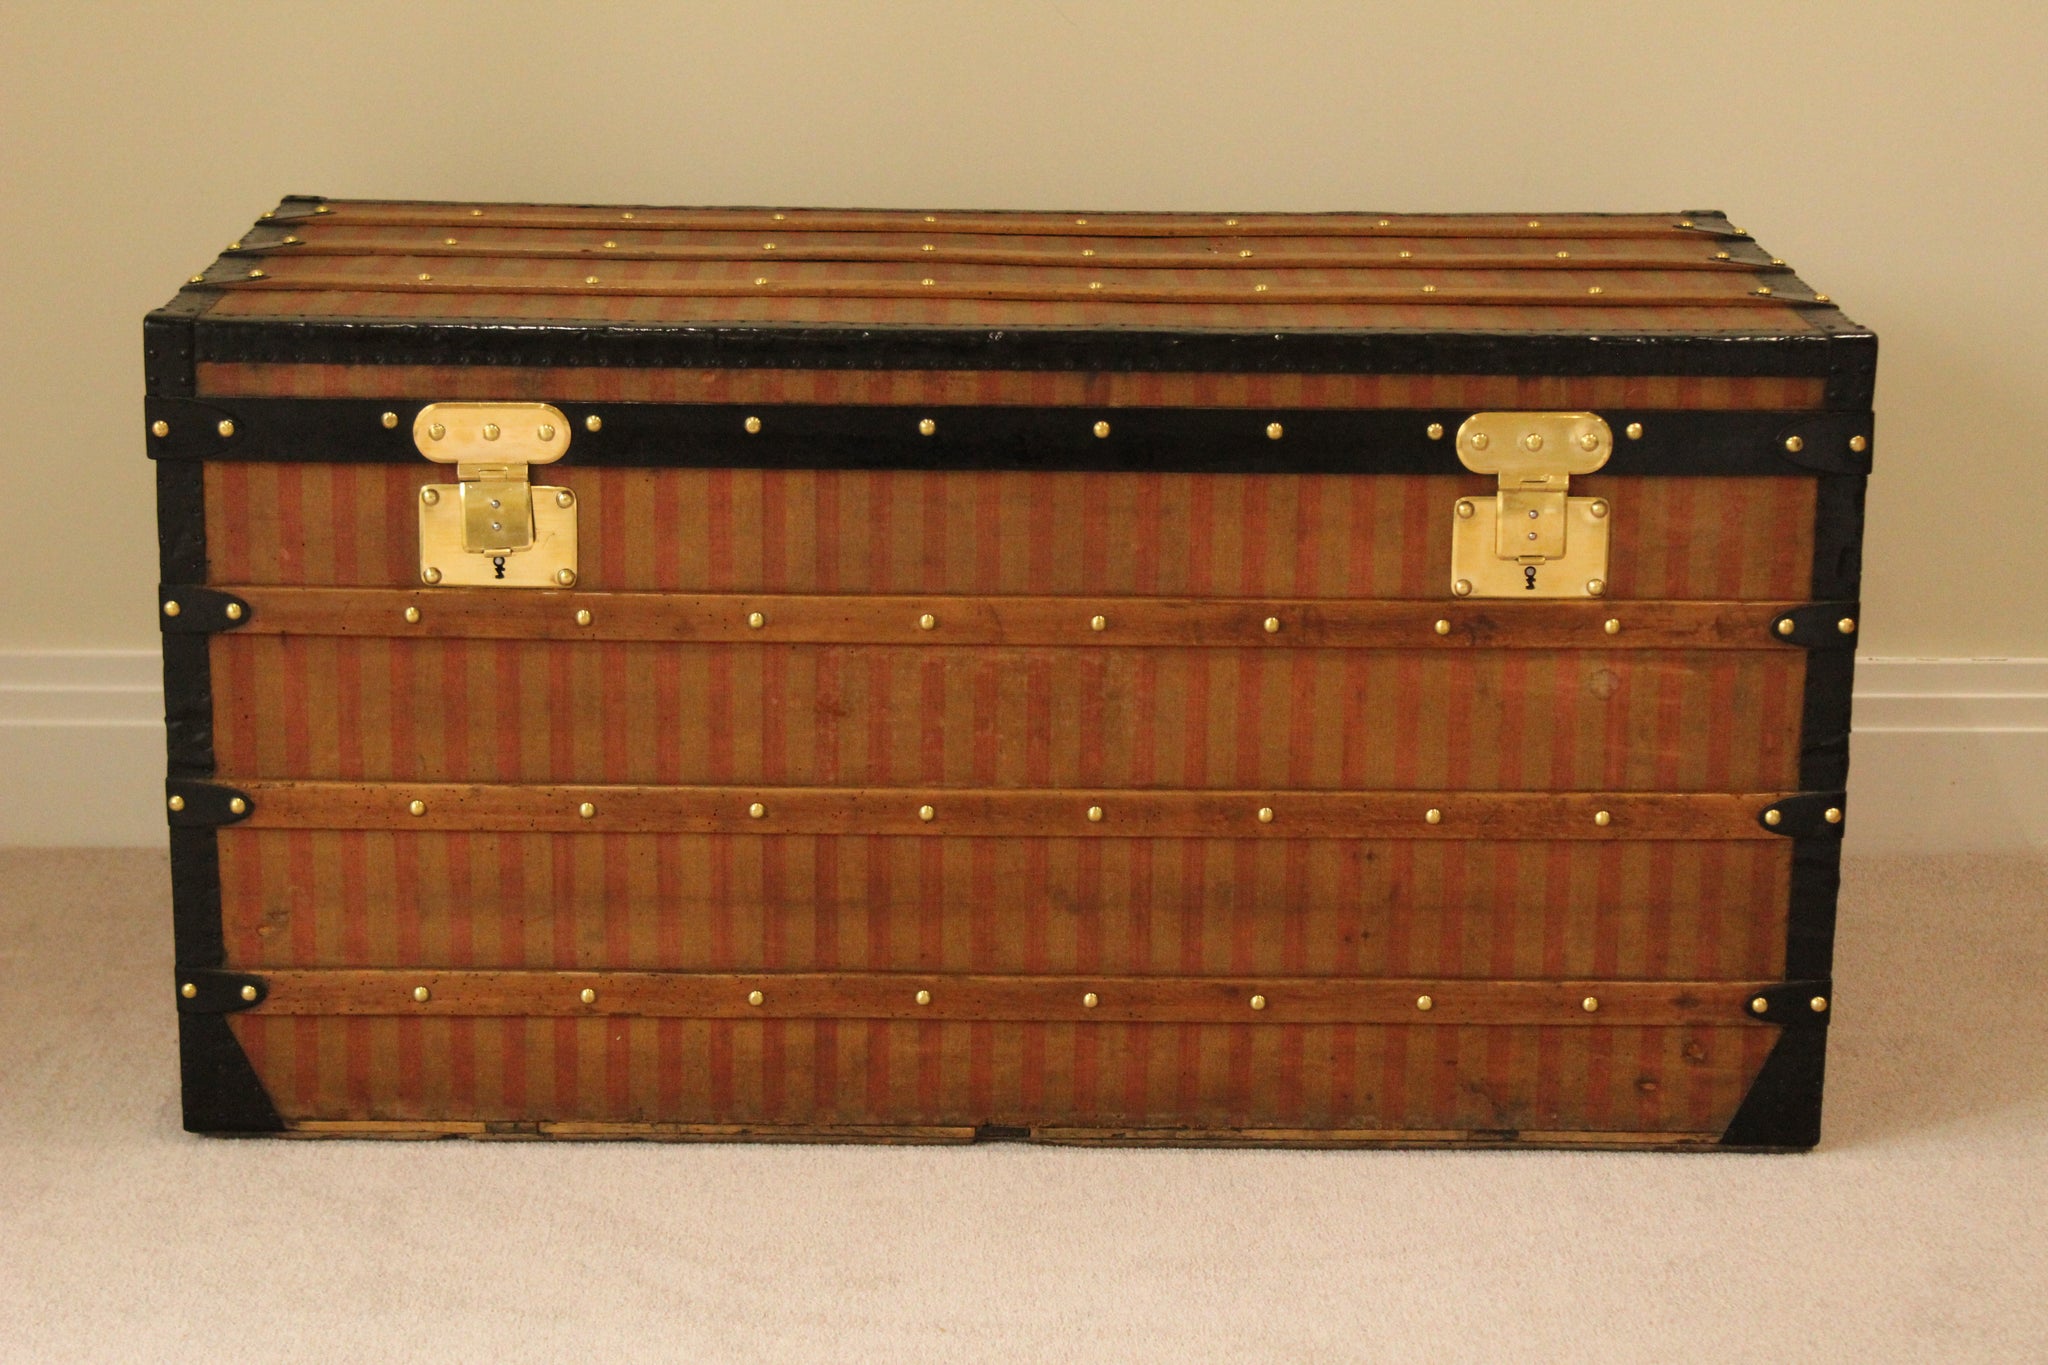 Striped Canvas Trunk from Louis Vuitton, 1876